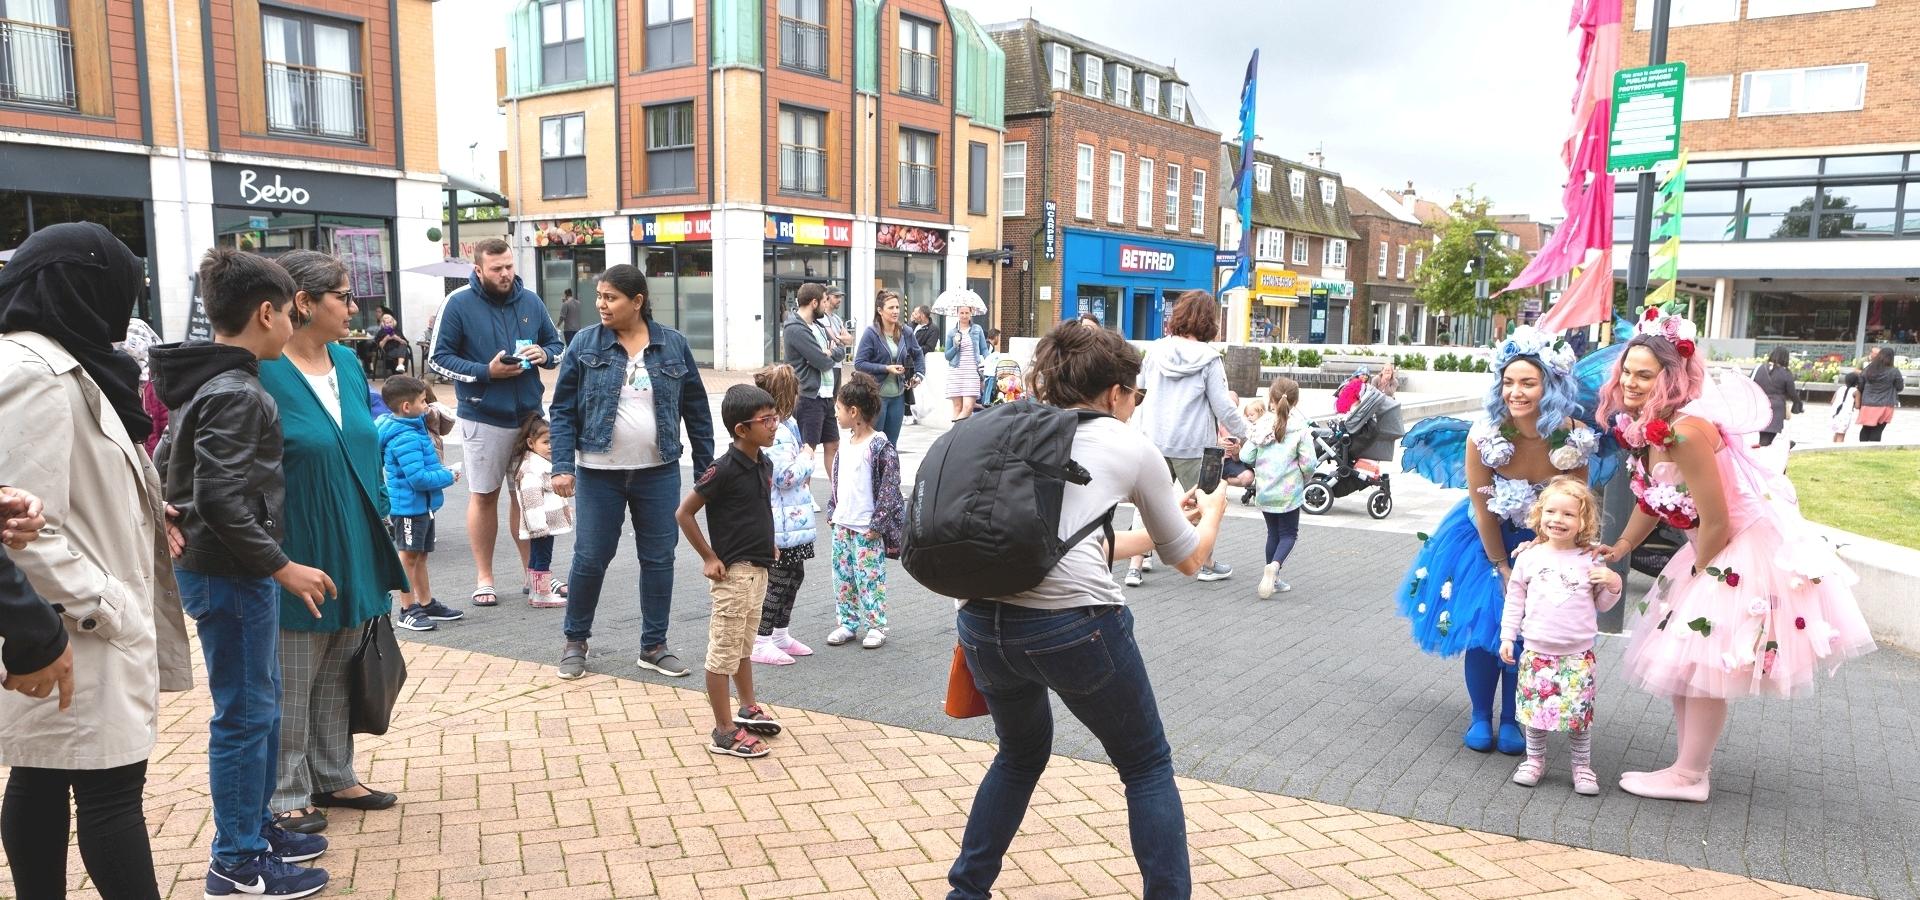 People at event in Hatfield town centre